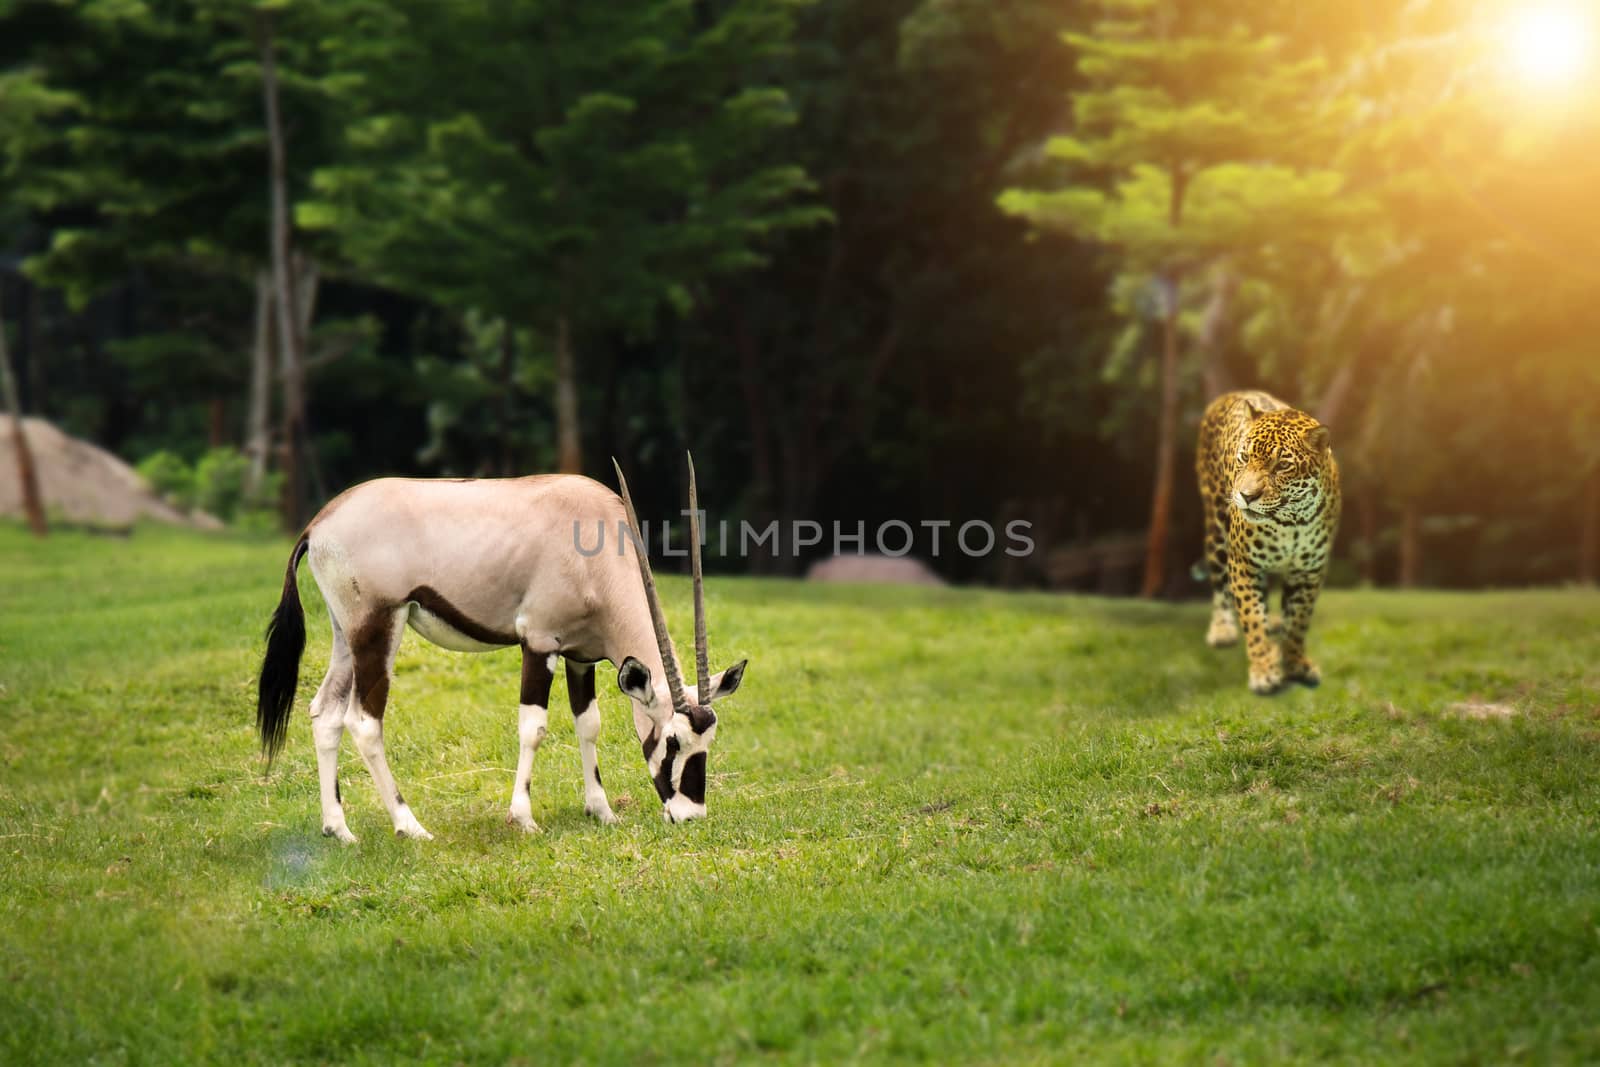 Animal wild life hunting food chain concept : leopard looking at Gemsbok (Gemsbuck) at green forest